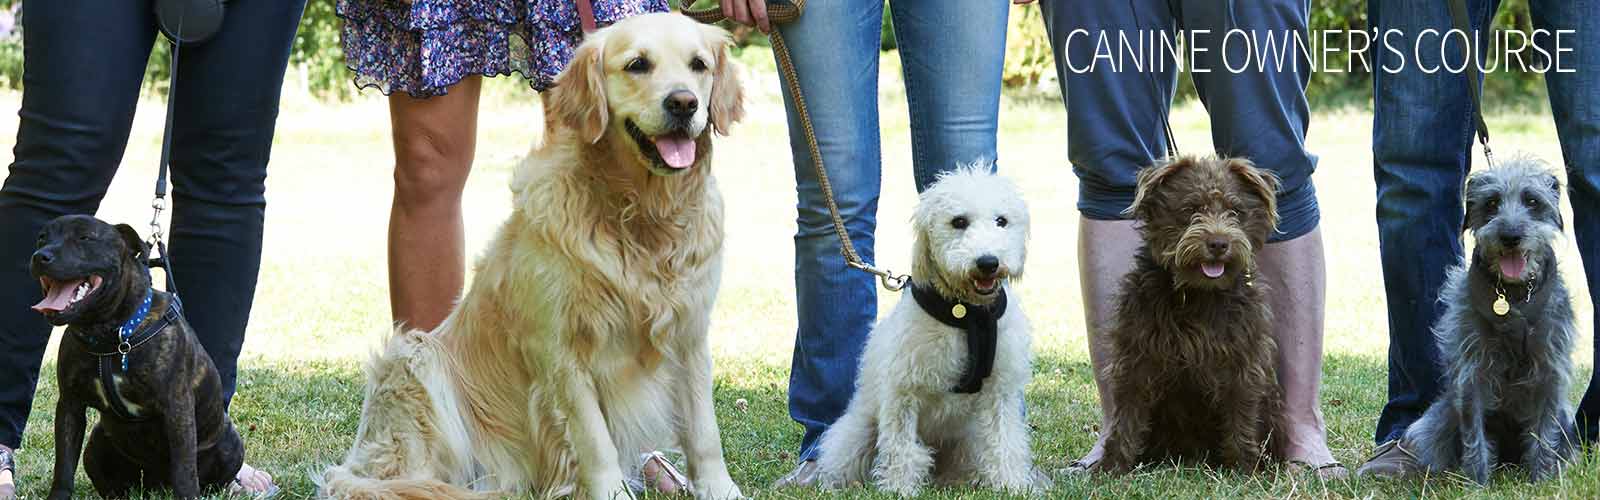 Holistic course for canine owner's